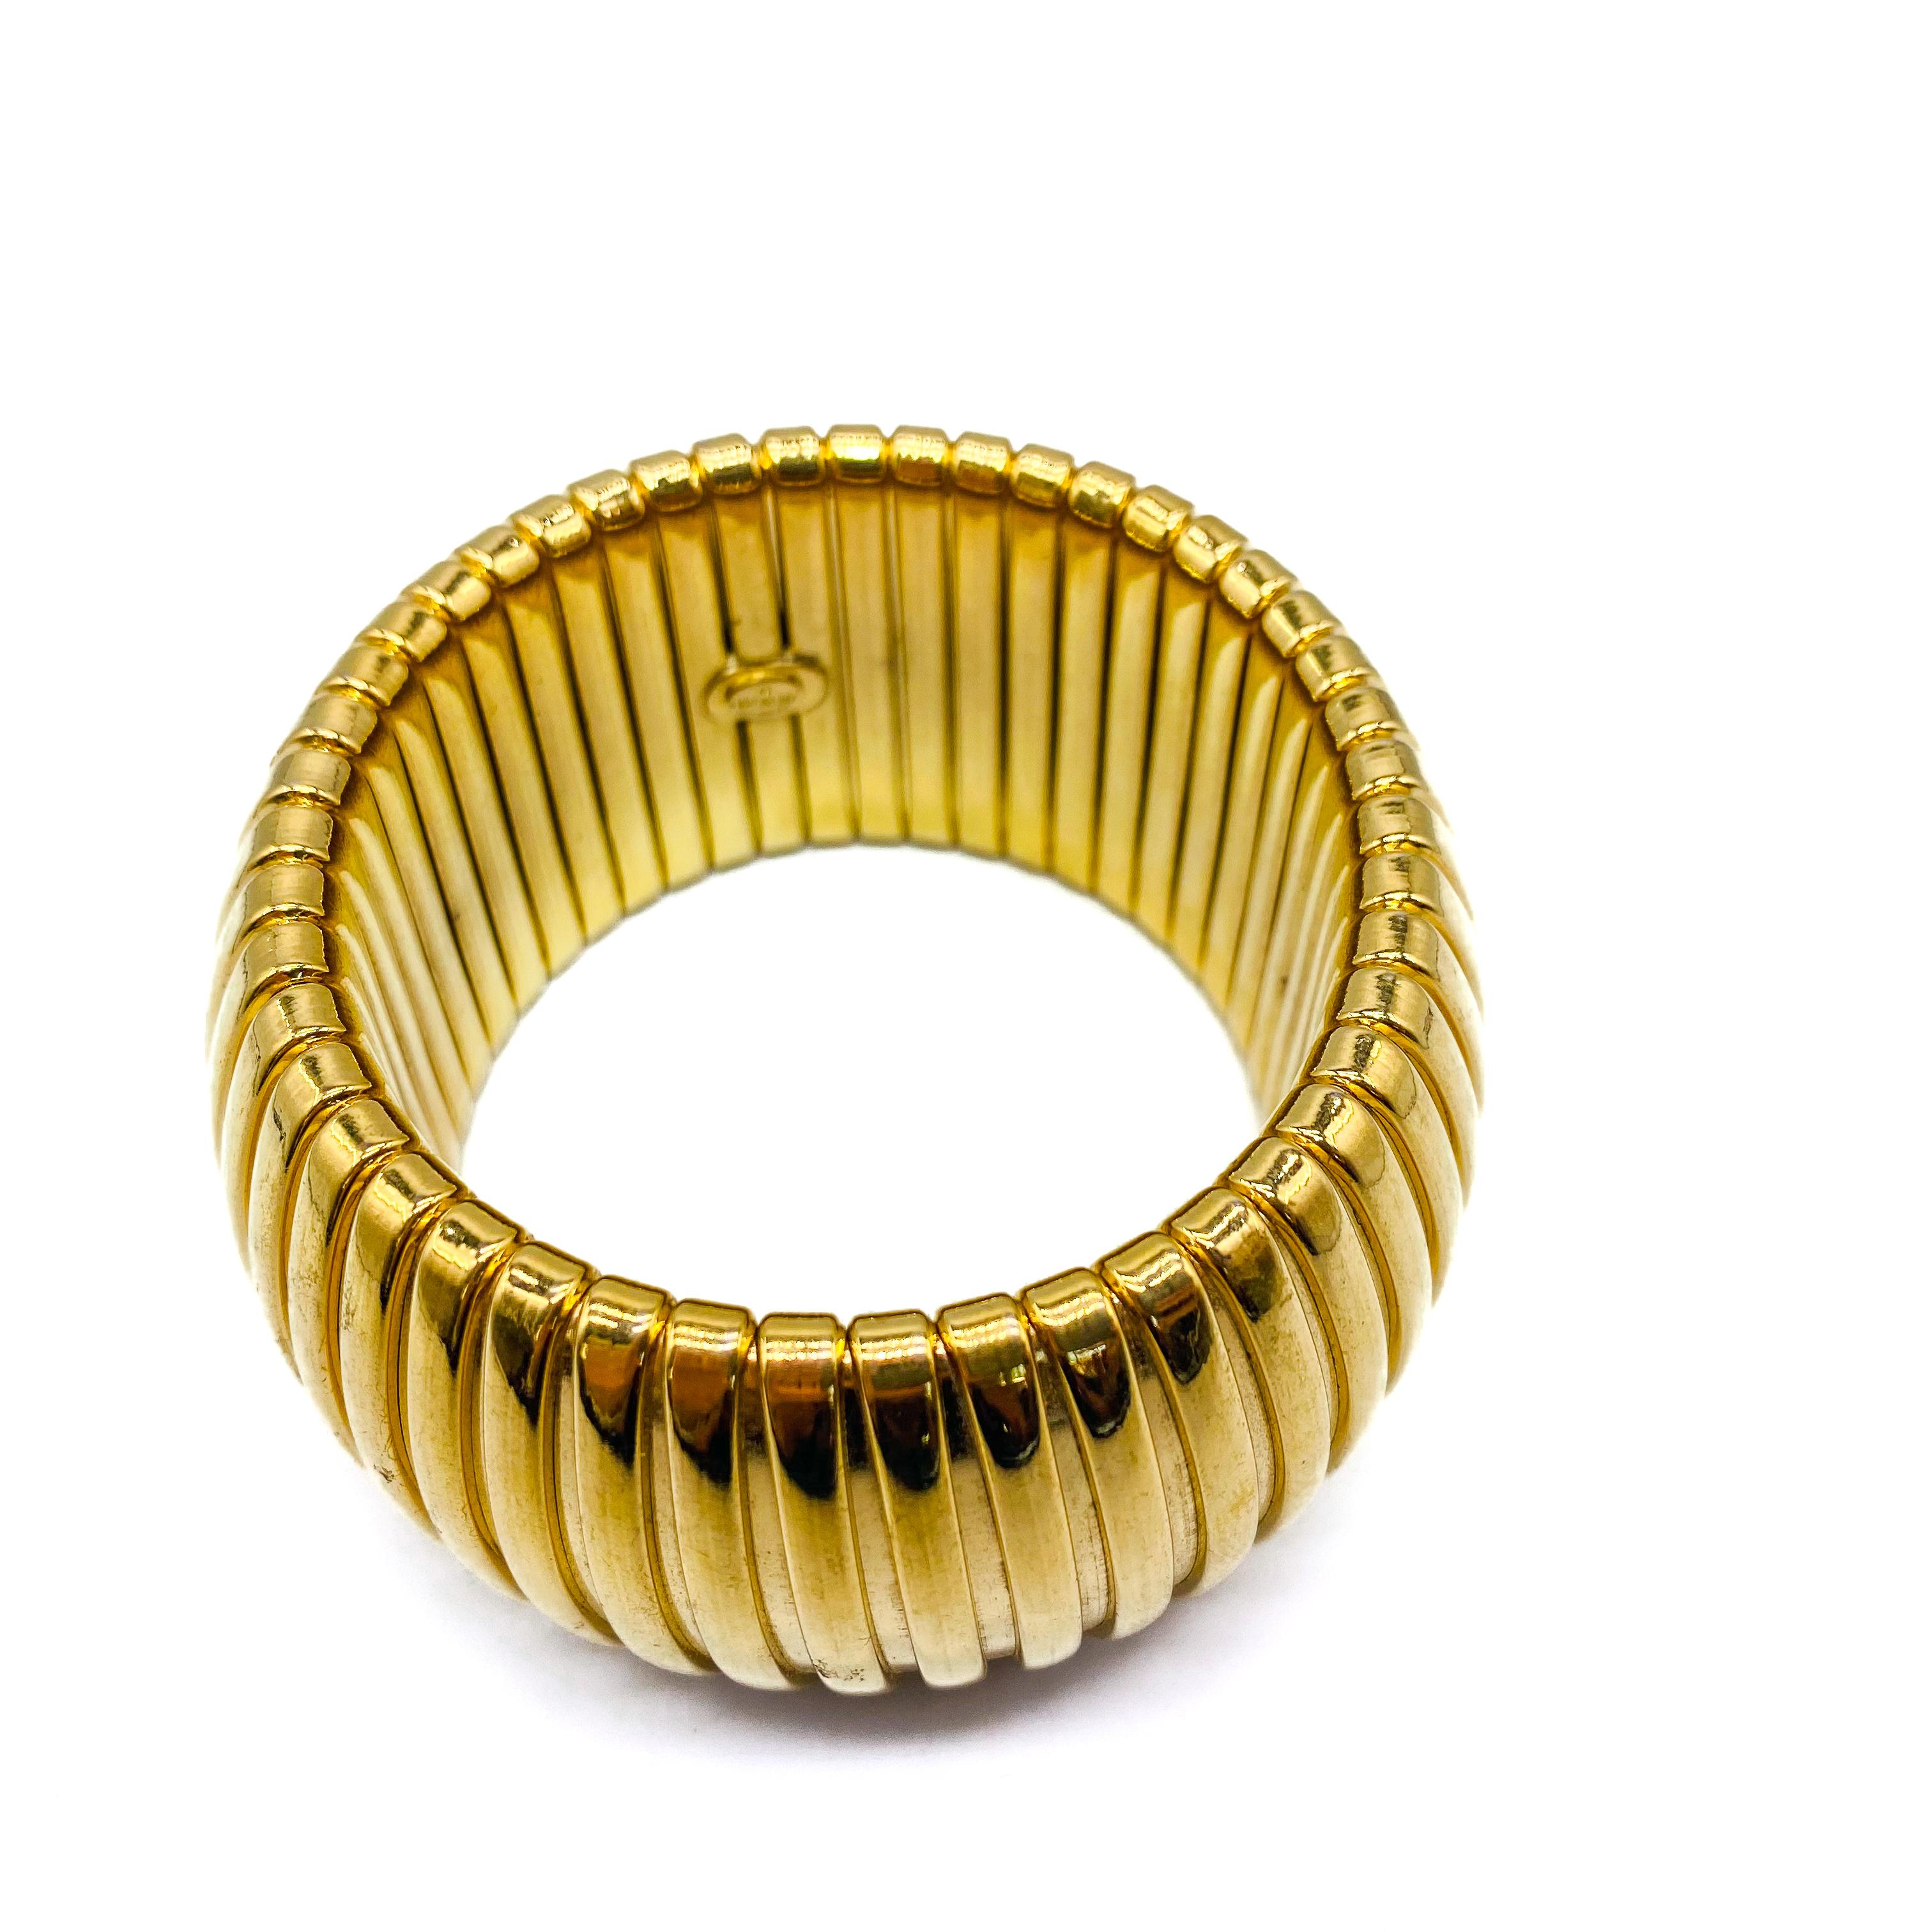 Givenchy Vintage 1980s Cuff Bracelet
Super cool wide statement bracelet from the iconic house of Hubert du Givenchy

Detail
-Made in the US in the 1980s
-Crafted from a ridged gold plated metal
-Matching earrings also available

Size & Fit
-Measures